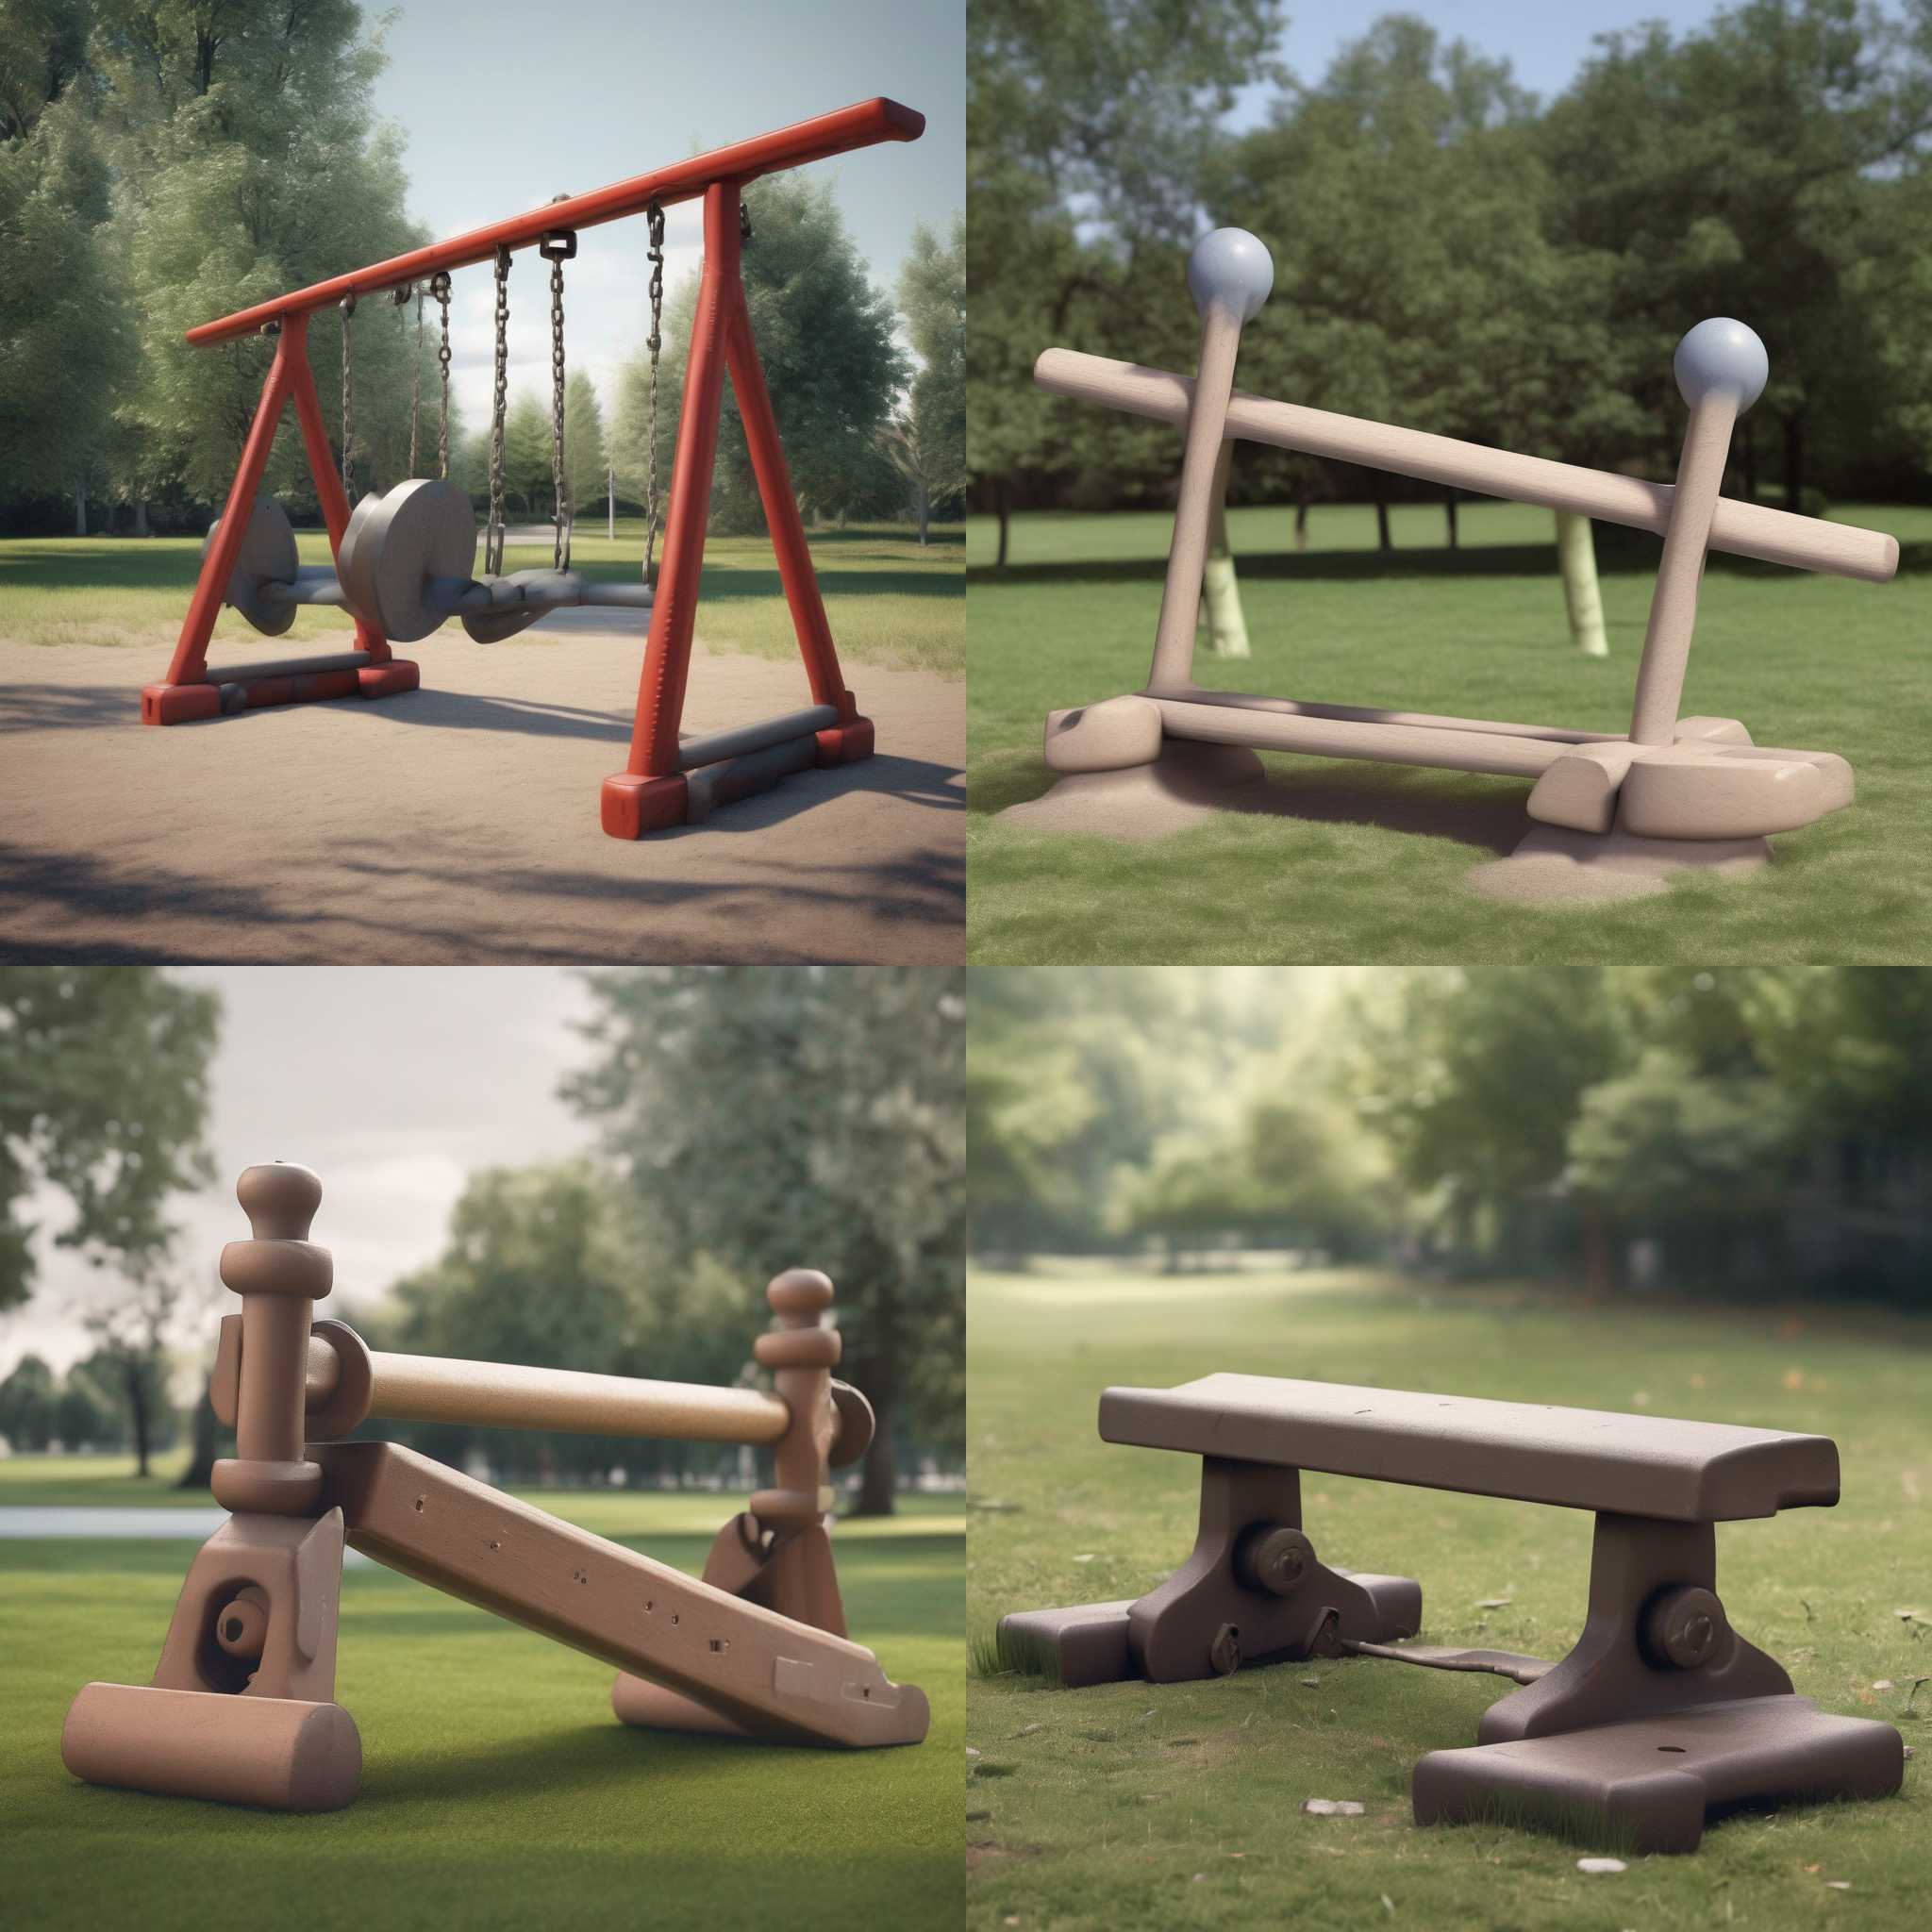 A seesaw with uneven weights on both sides